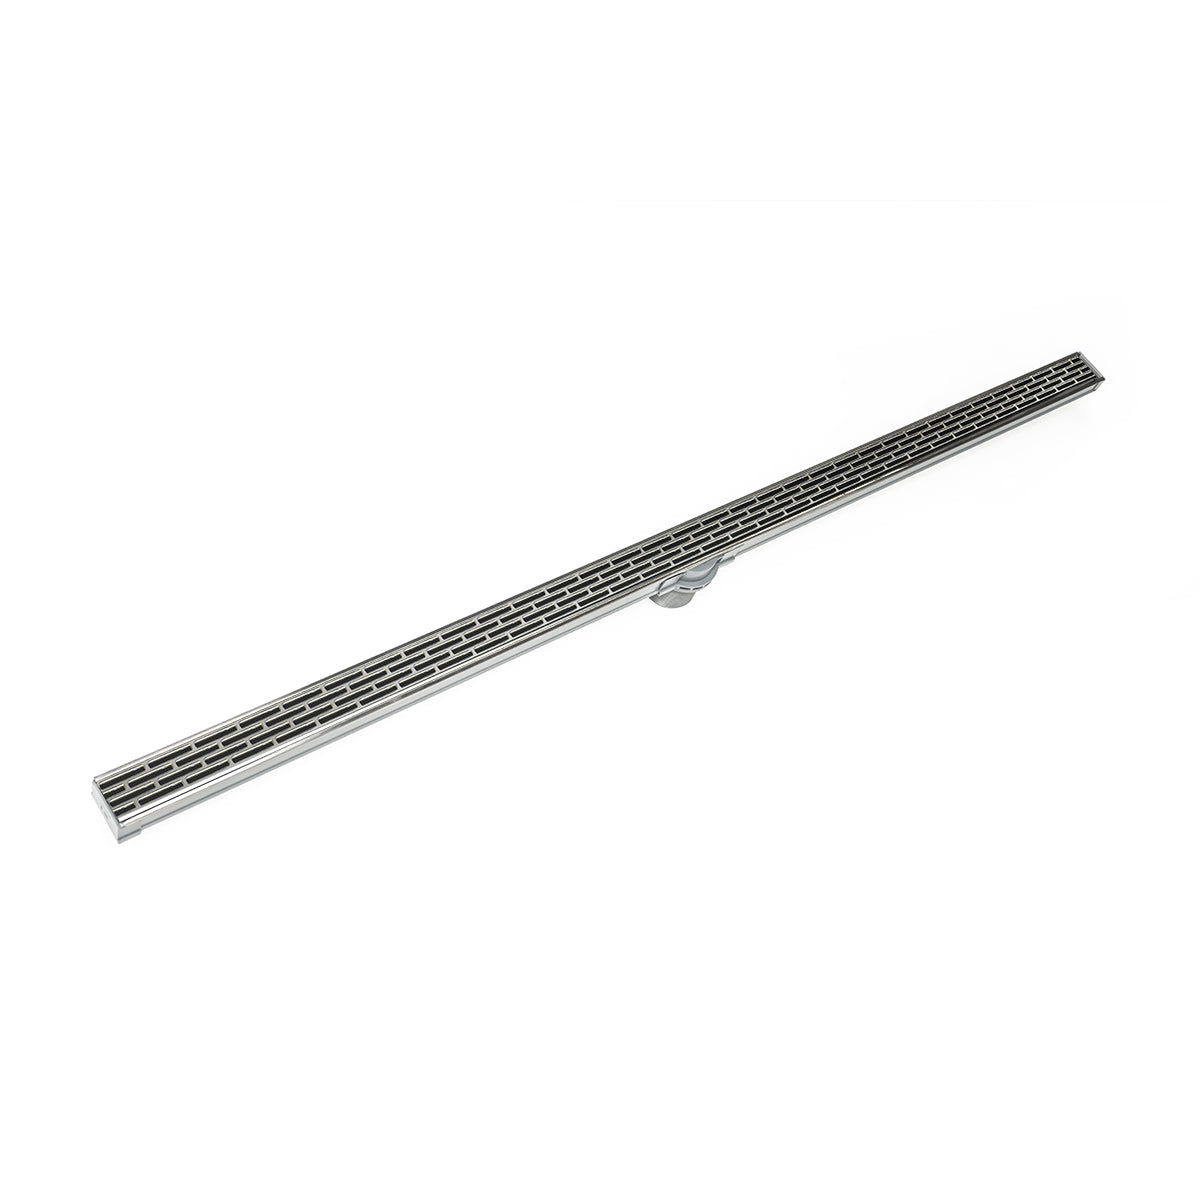 Infinity Drain 96" S-PVC Series Low Profile Site Sizable Linear Drain Kit with 1 1/2" Perforated Offset Slot Grate